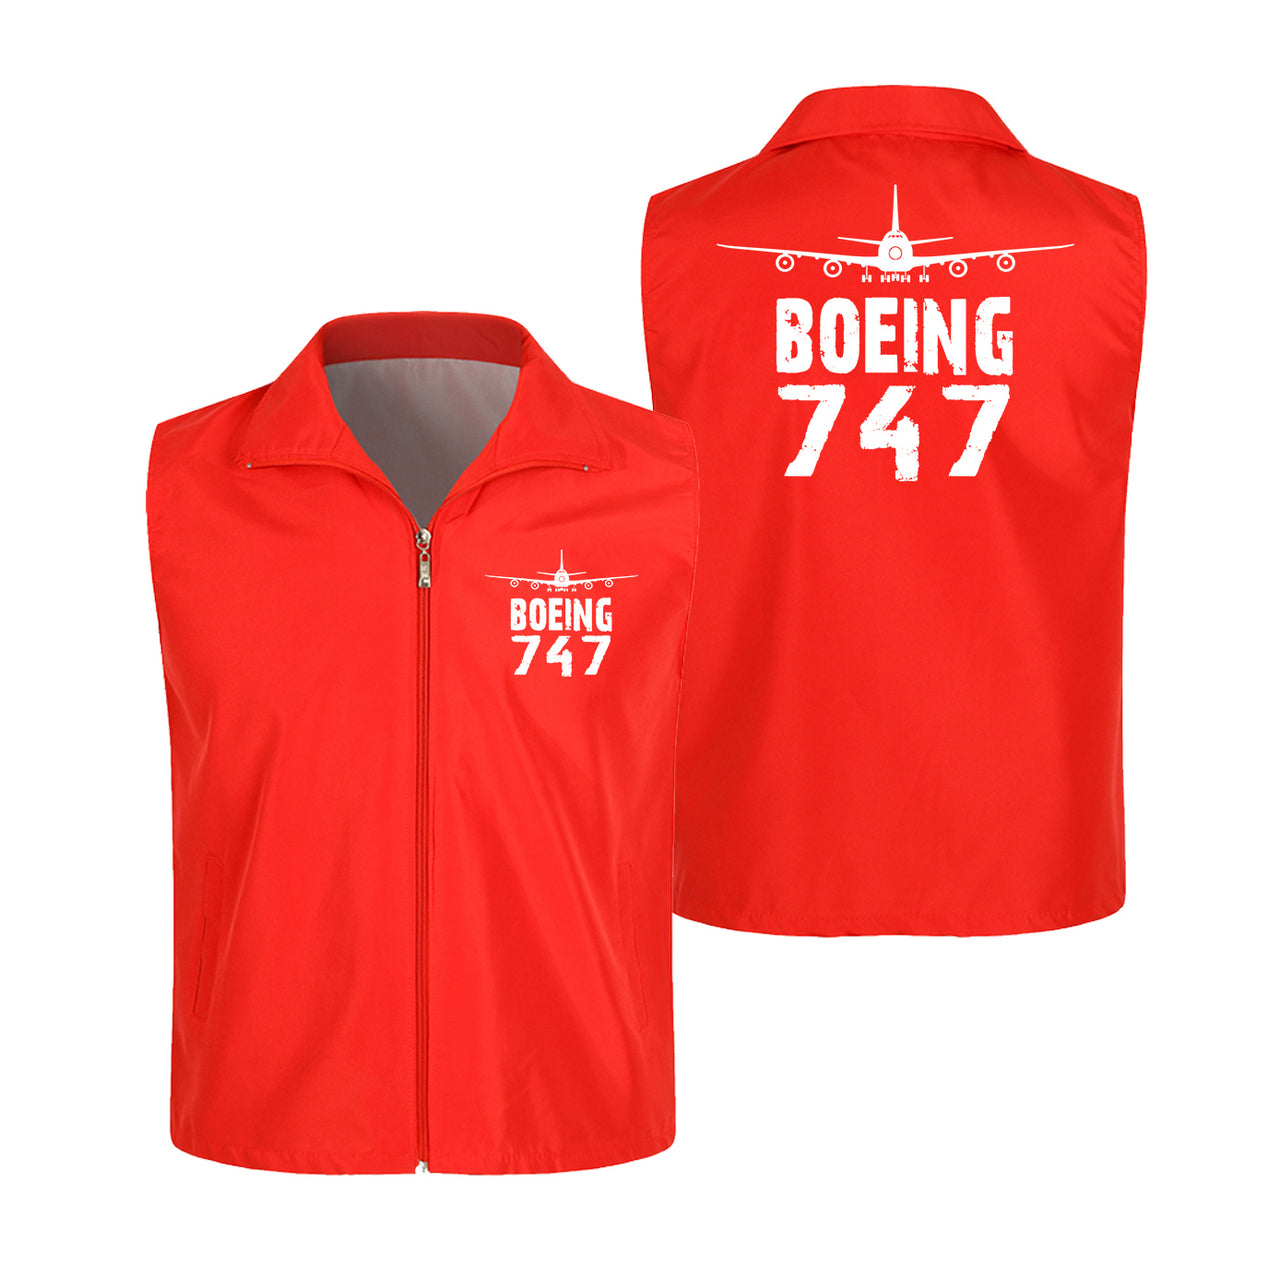 Boeing 747 & Plane Designed Thin Style Vests